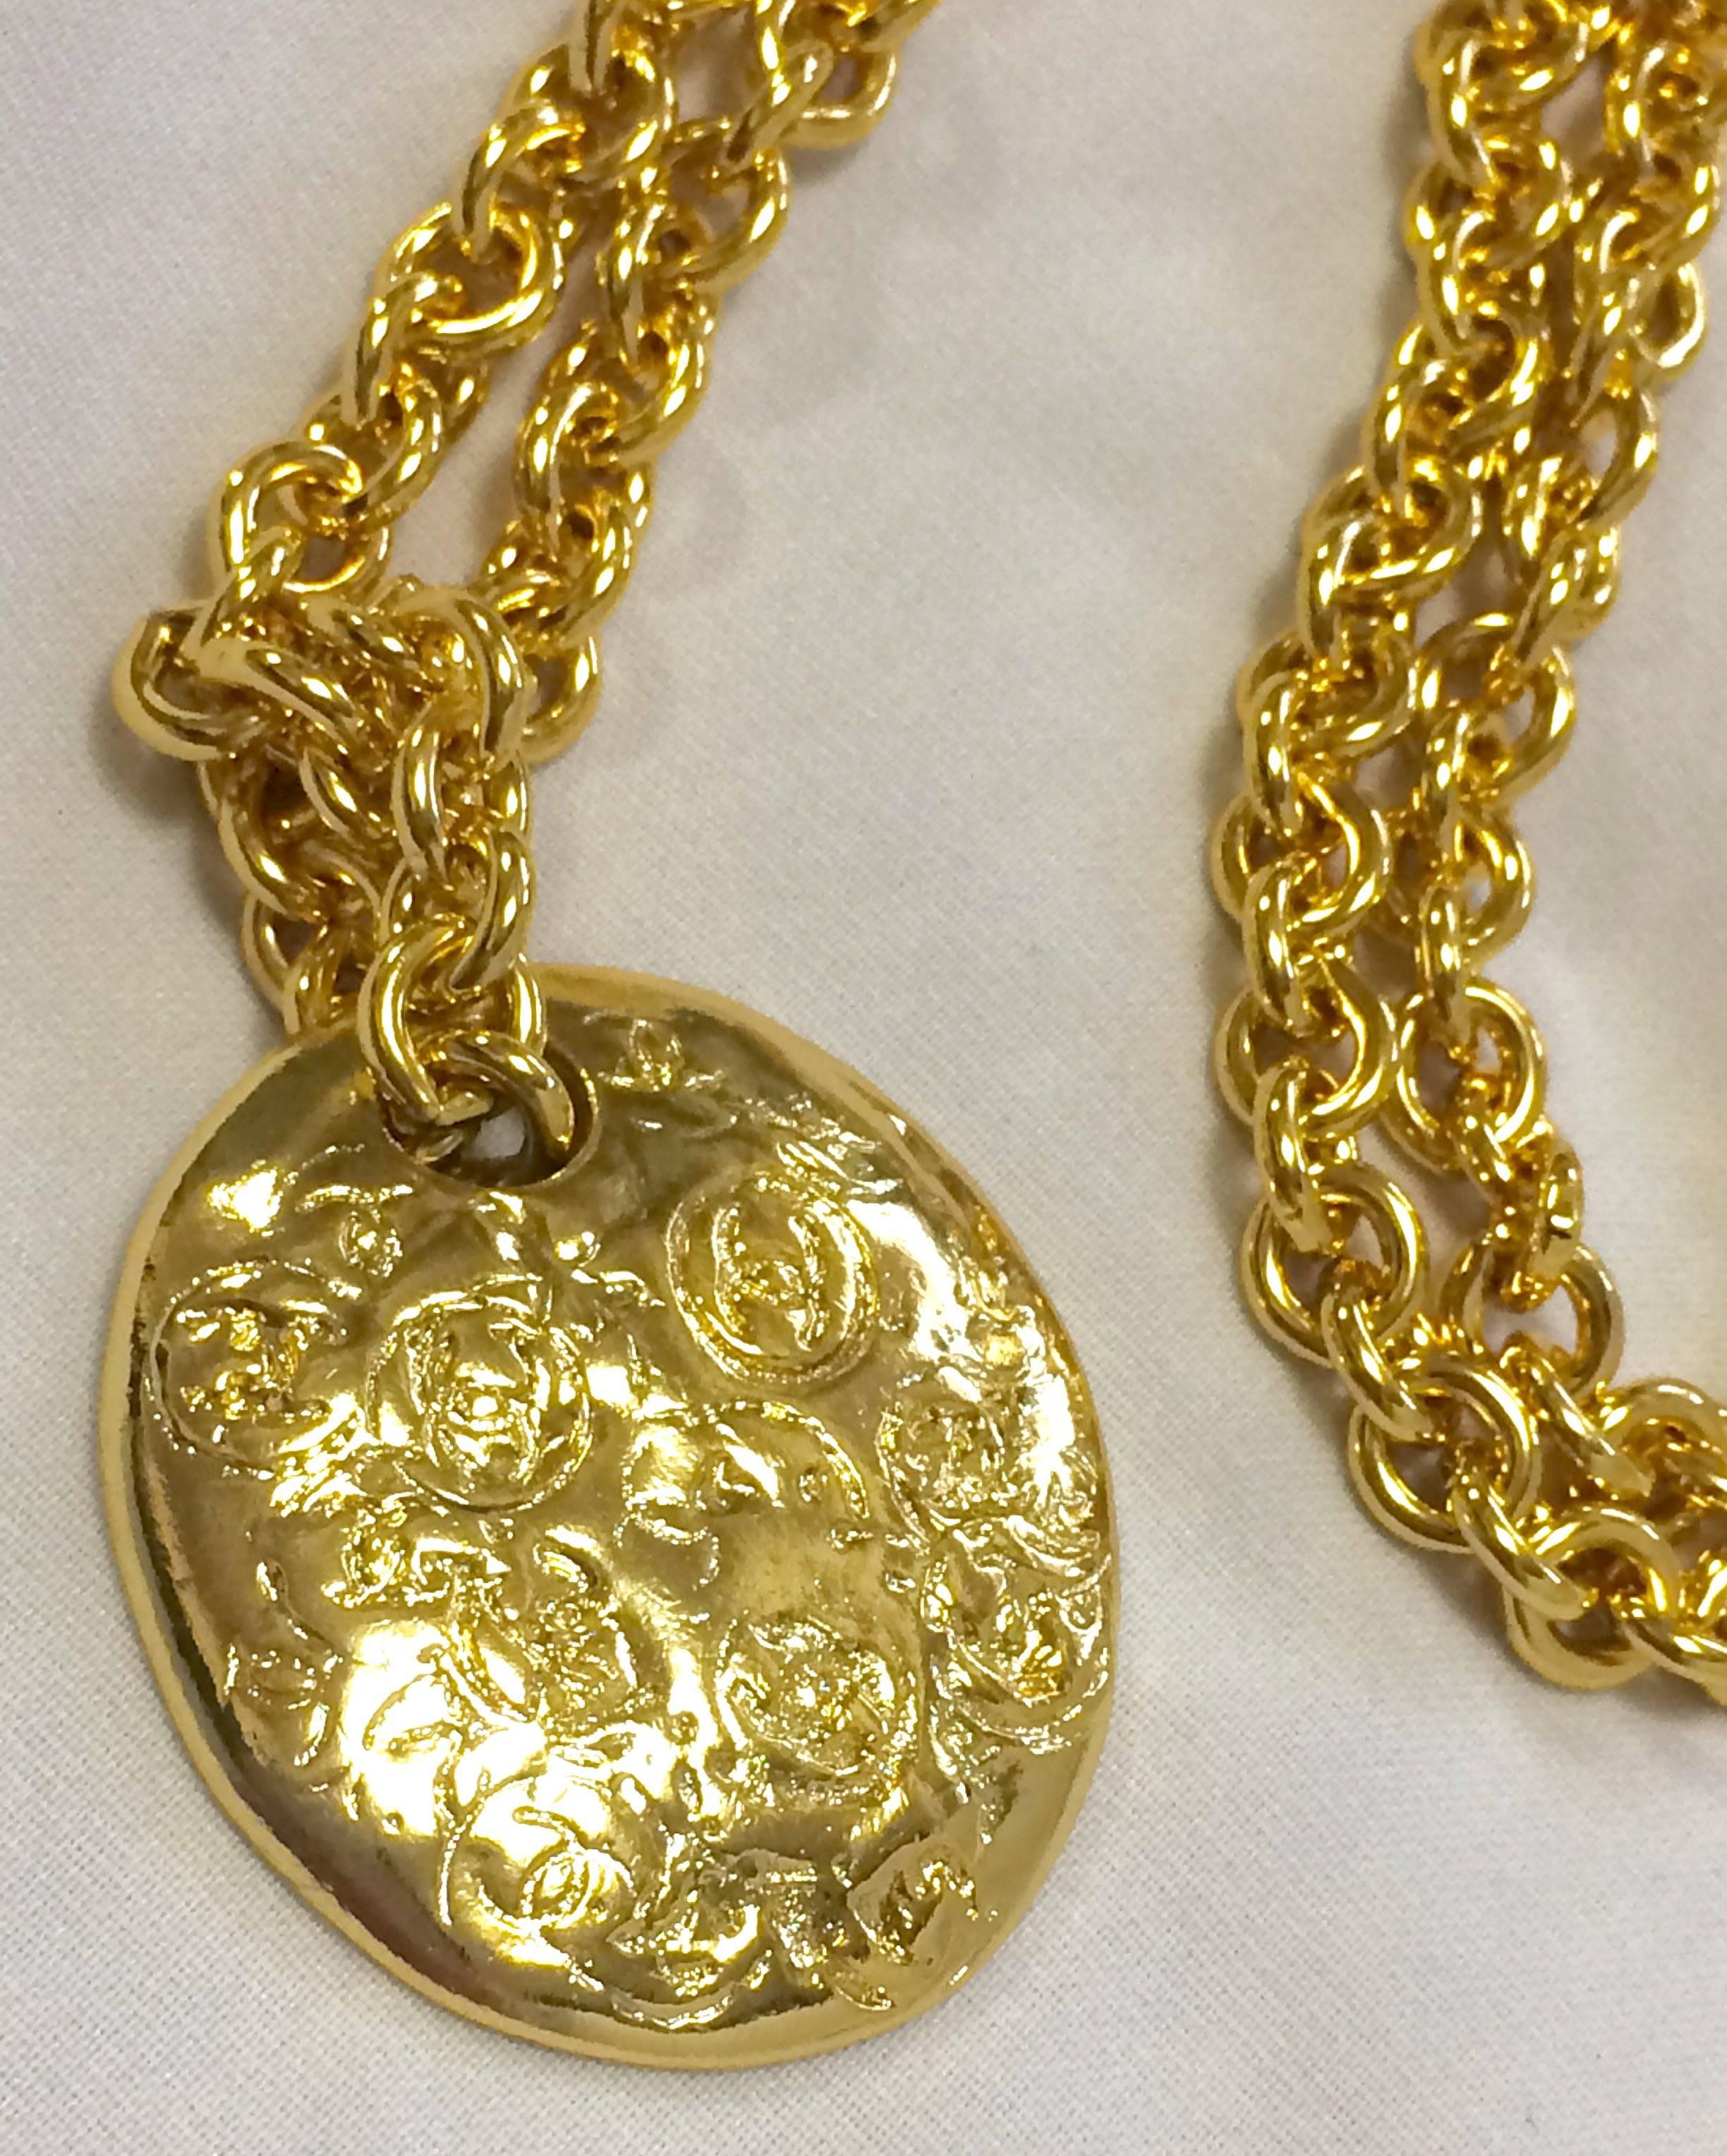 Women's MINT. Vintage CHANEL golden long chain necklace with round coin, medal shape top